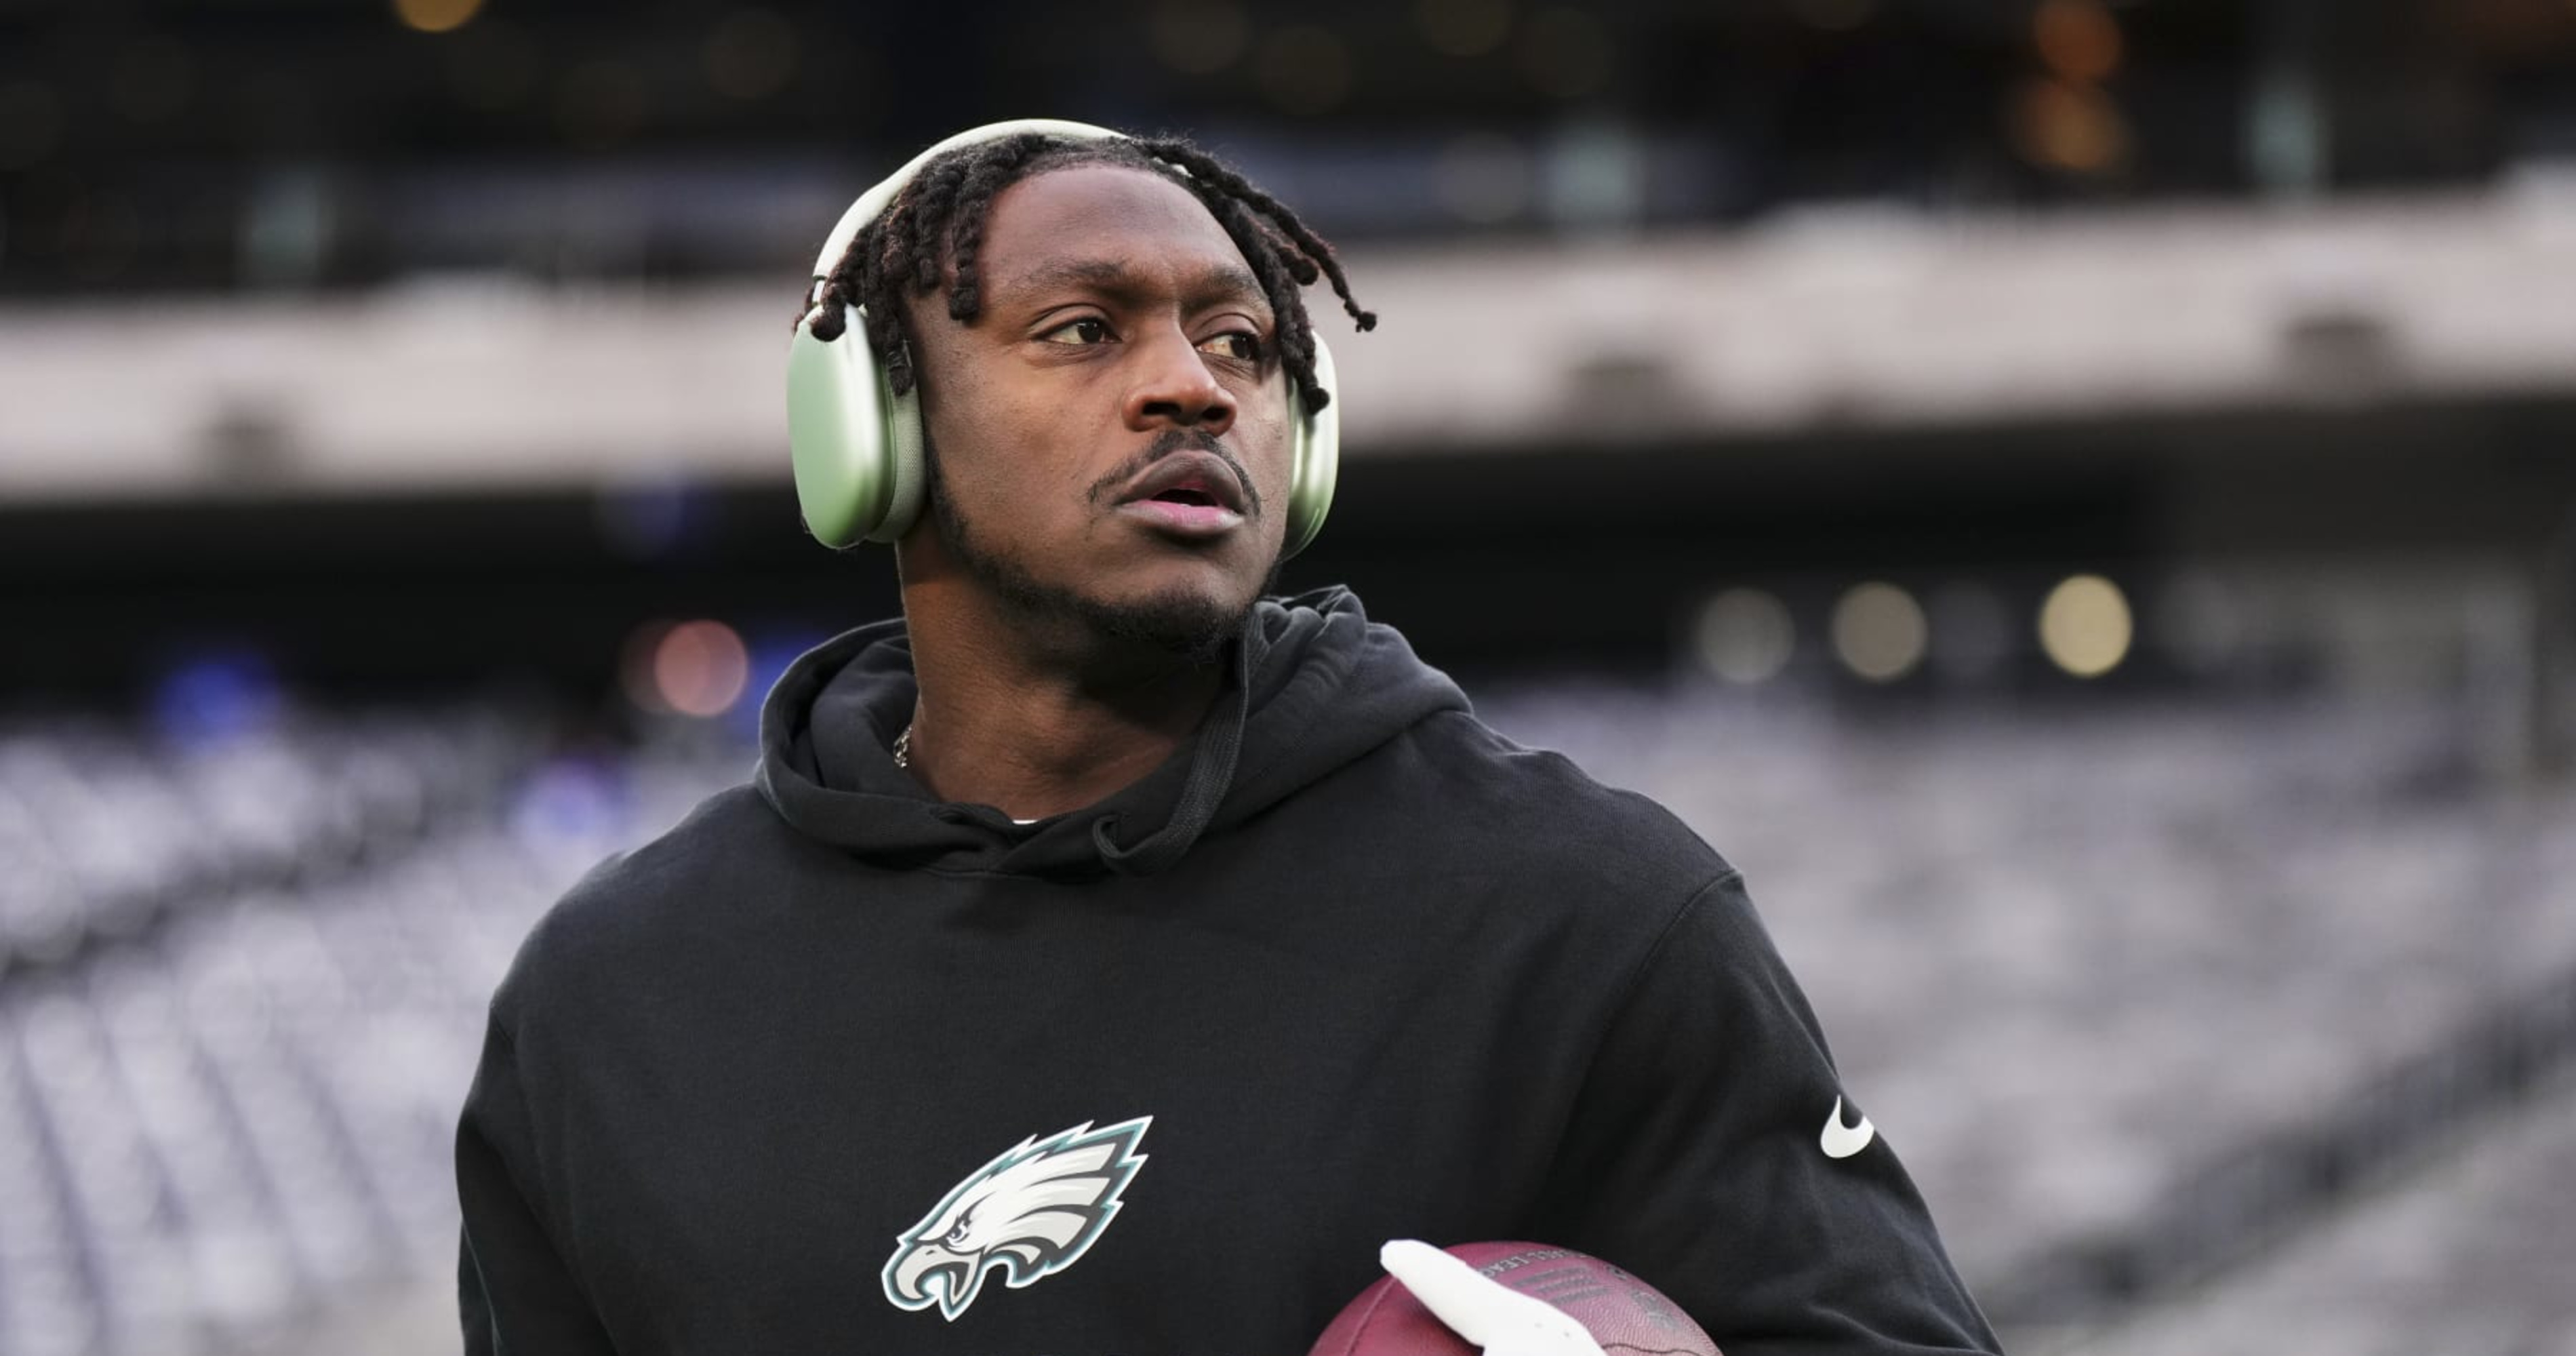 Report: A.J. Brown Wiping Team Photos from Instagram Wasn't 'Anti-Eagles in Any Way'